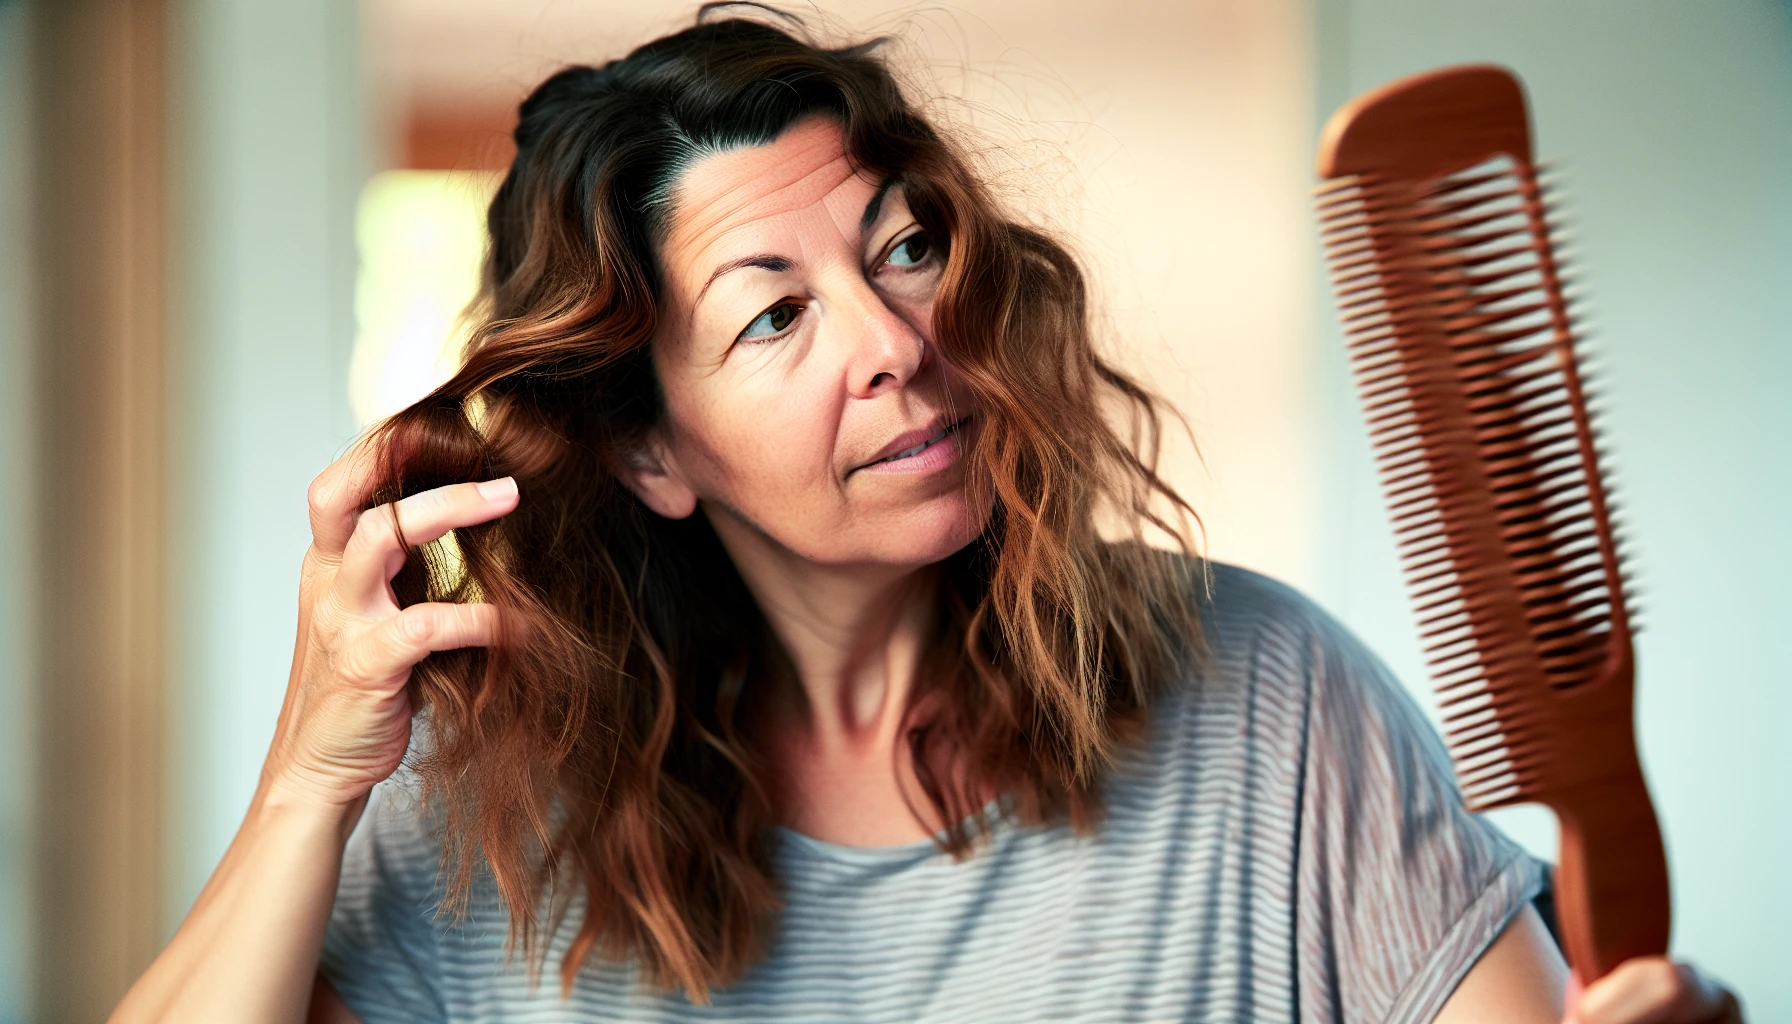 Photo of a woman gently brushing her hair to minimize postpartum hair loss